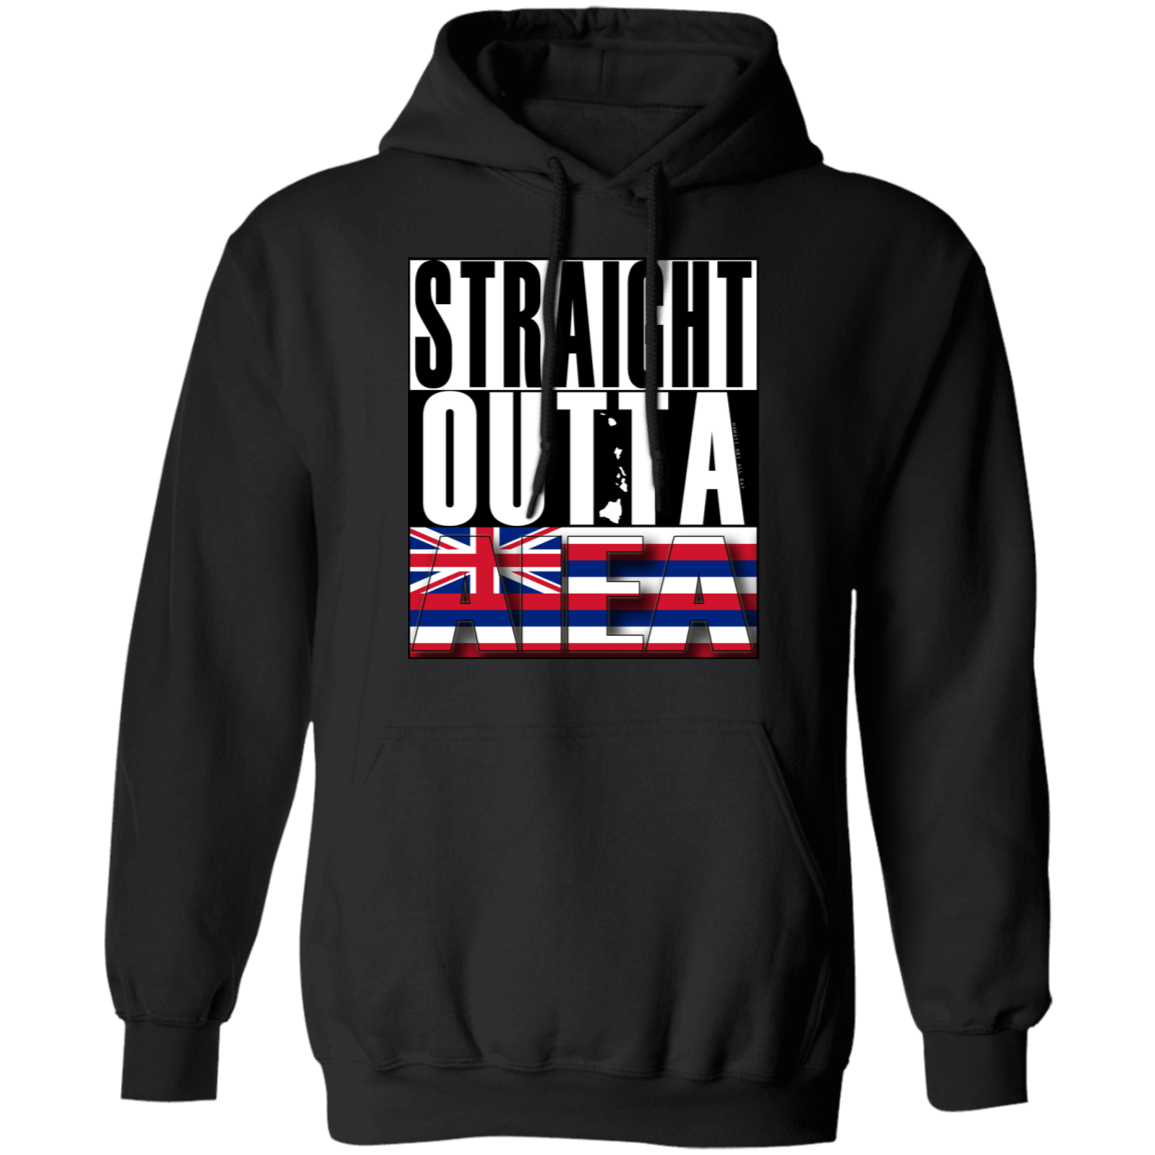 Straight Outta Aiea Pullover Hoodie, Sweatshirts, Hawaii Nei All Day